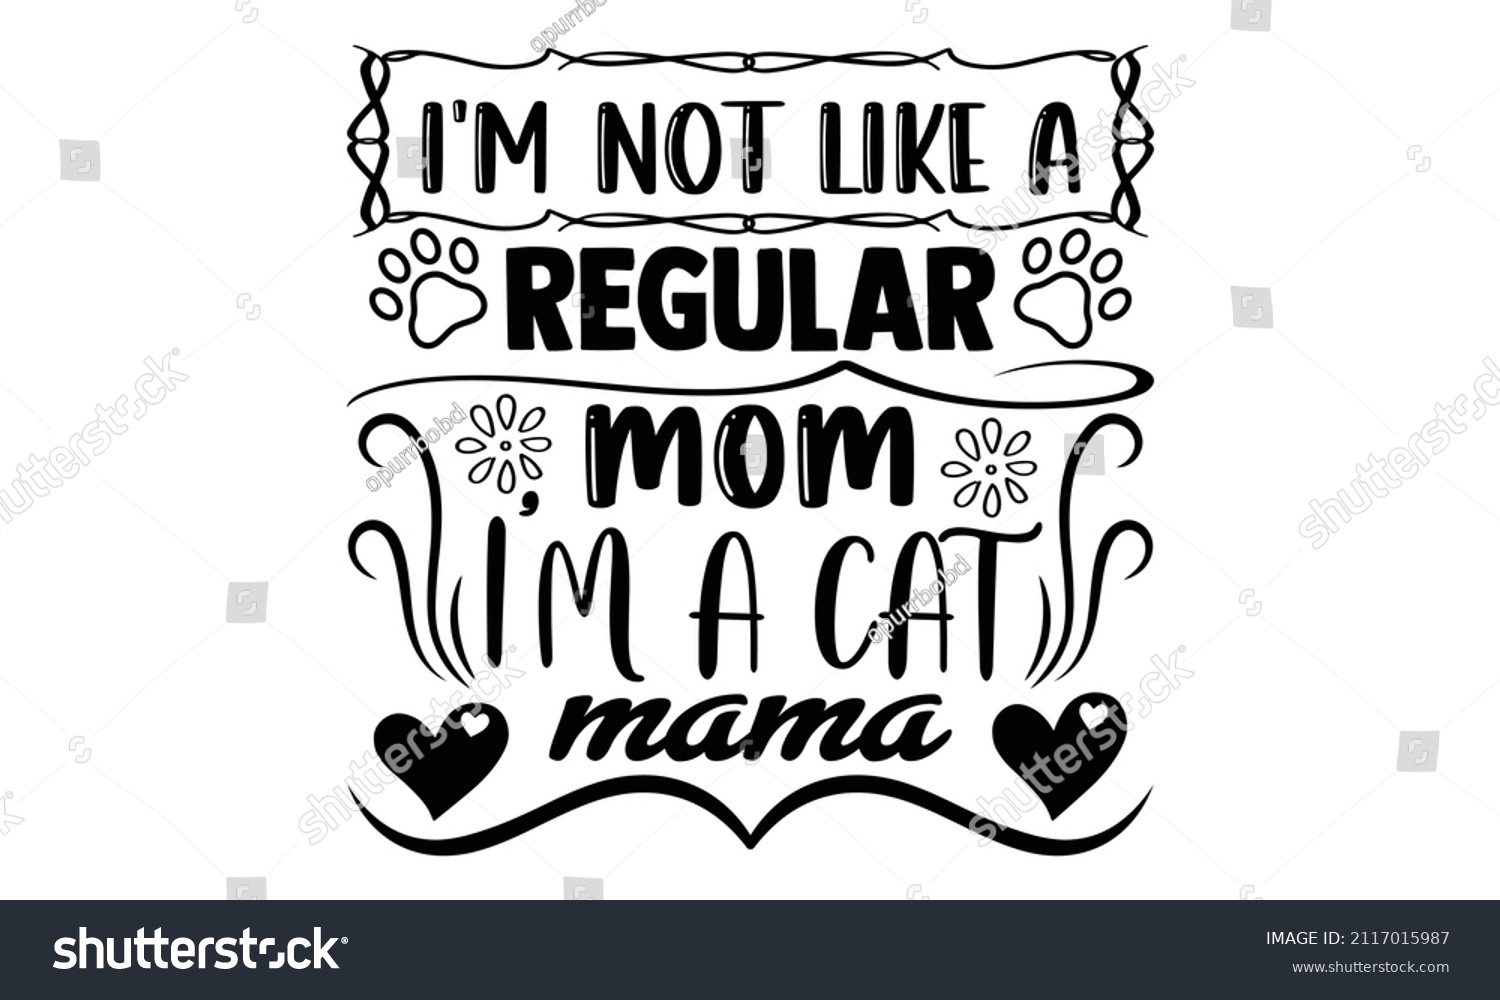 SVG of I'm not like a regular mom I'm a cat mama- Cat t-shirt design, Hand drawn lettering phrase, Calligraphy t-shirt design, Isolated on white background, Handwritten vector sign, SVG, EPS 10 svg